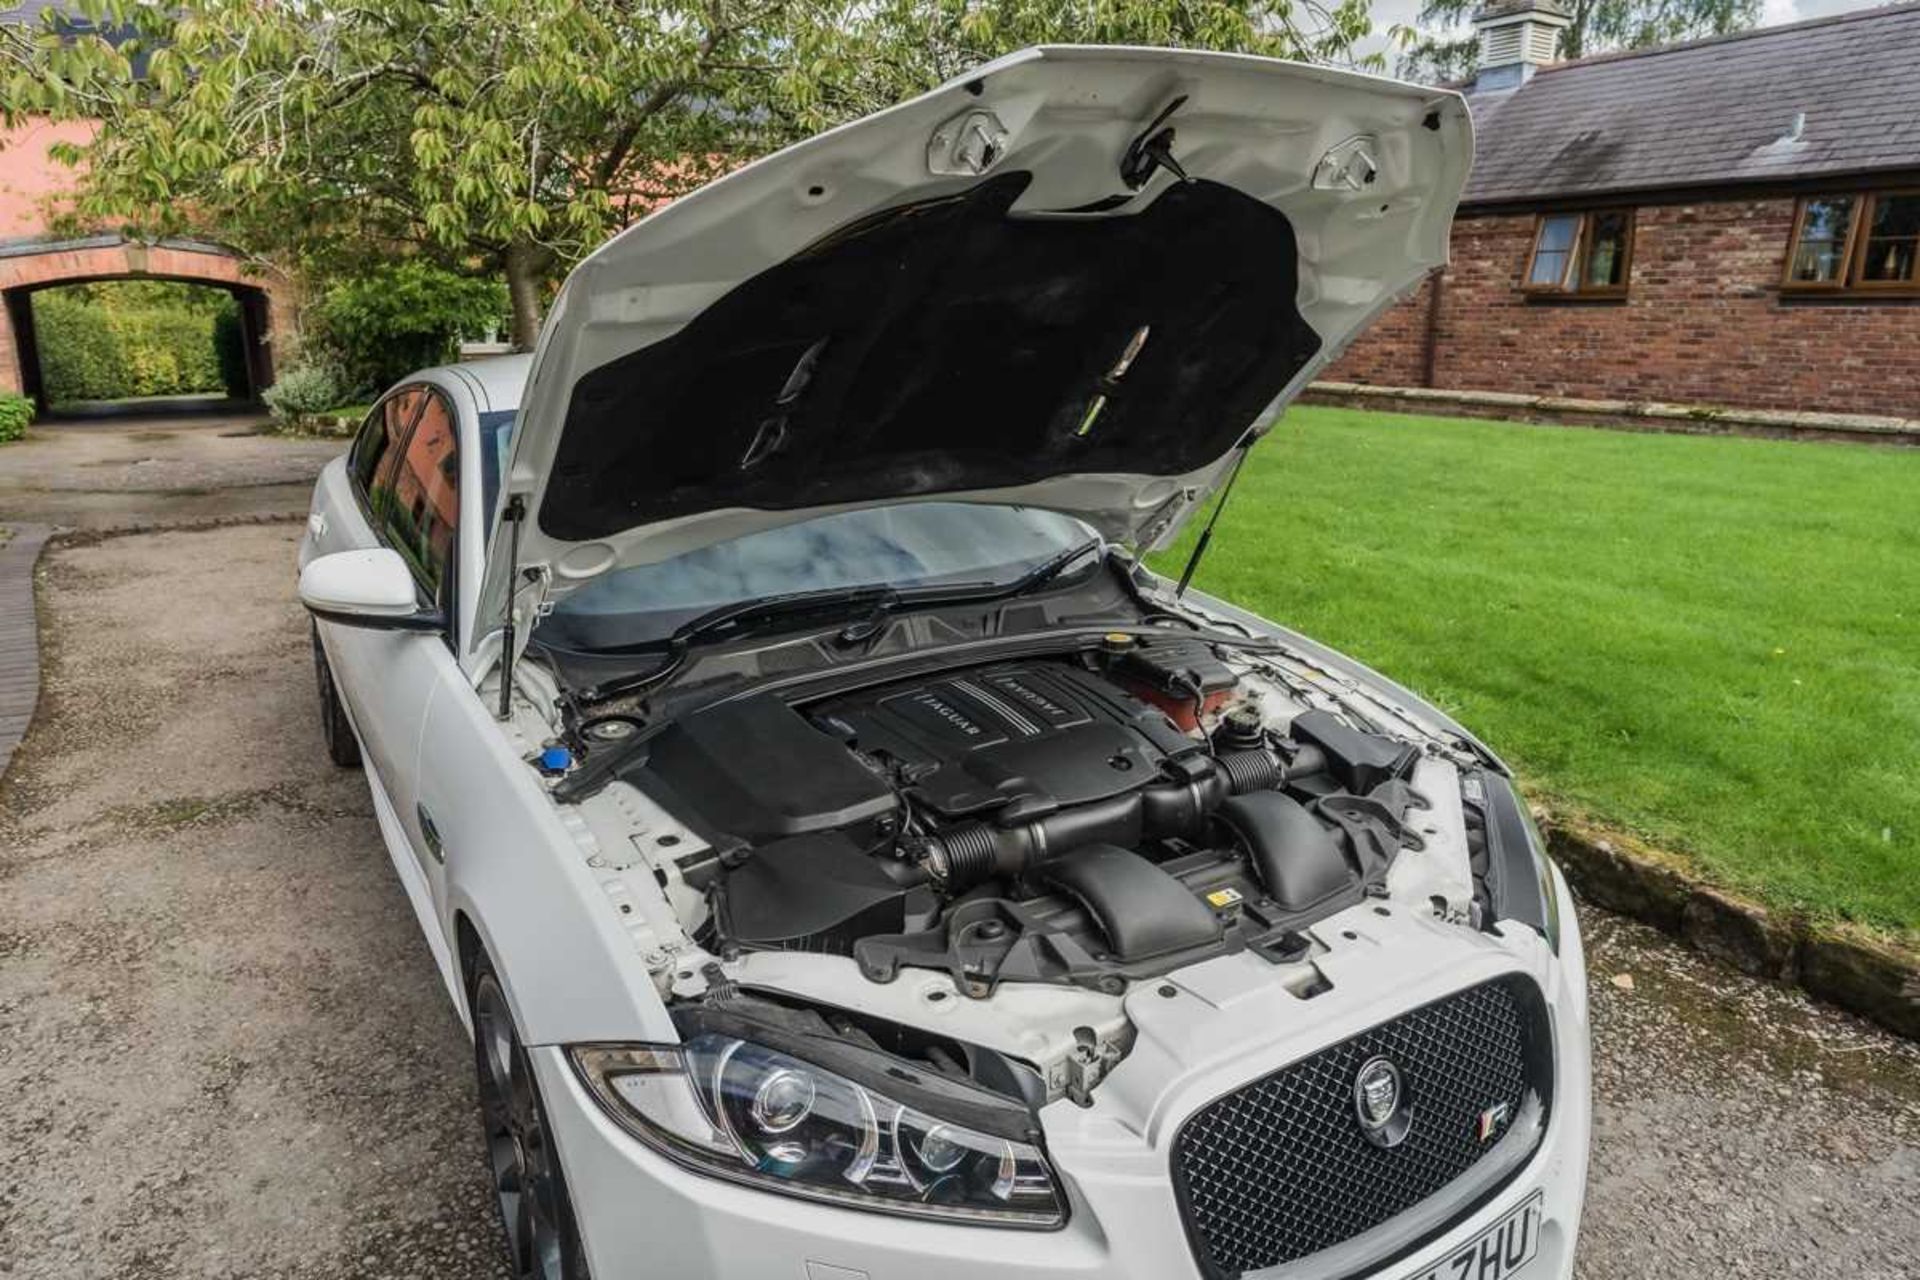 2011 Jaguar XFR Saloon 500 horsepower four-door super saloon, with an enviable factory specification - Image 77 of 83